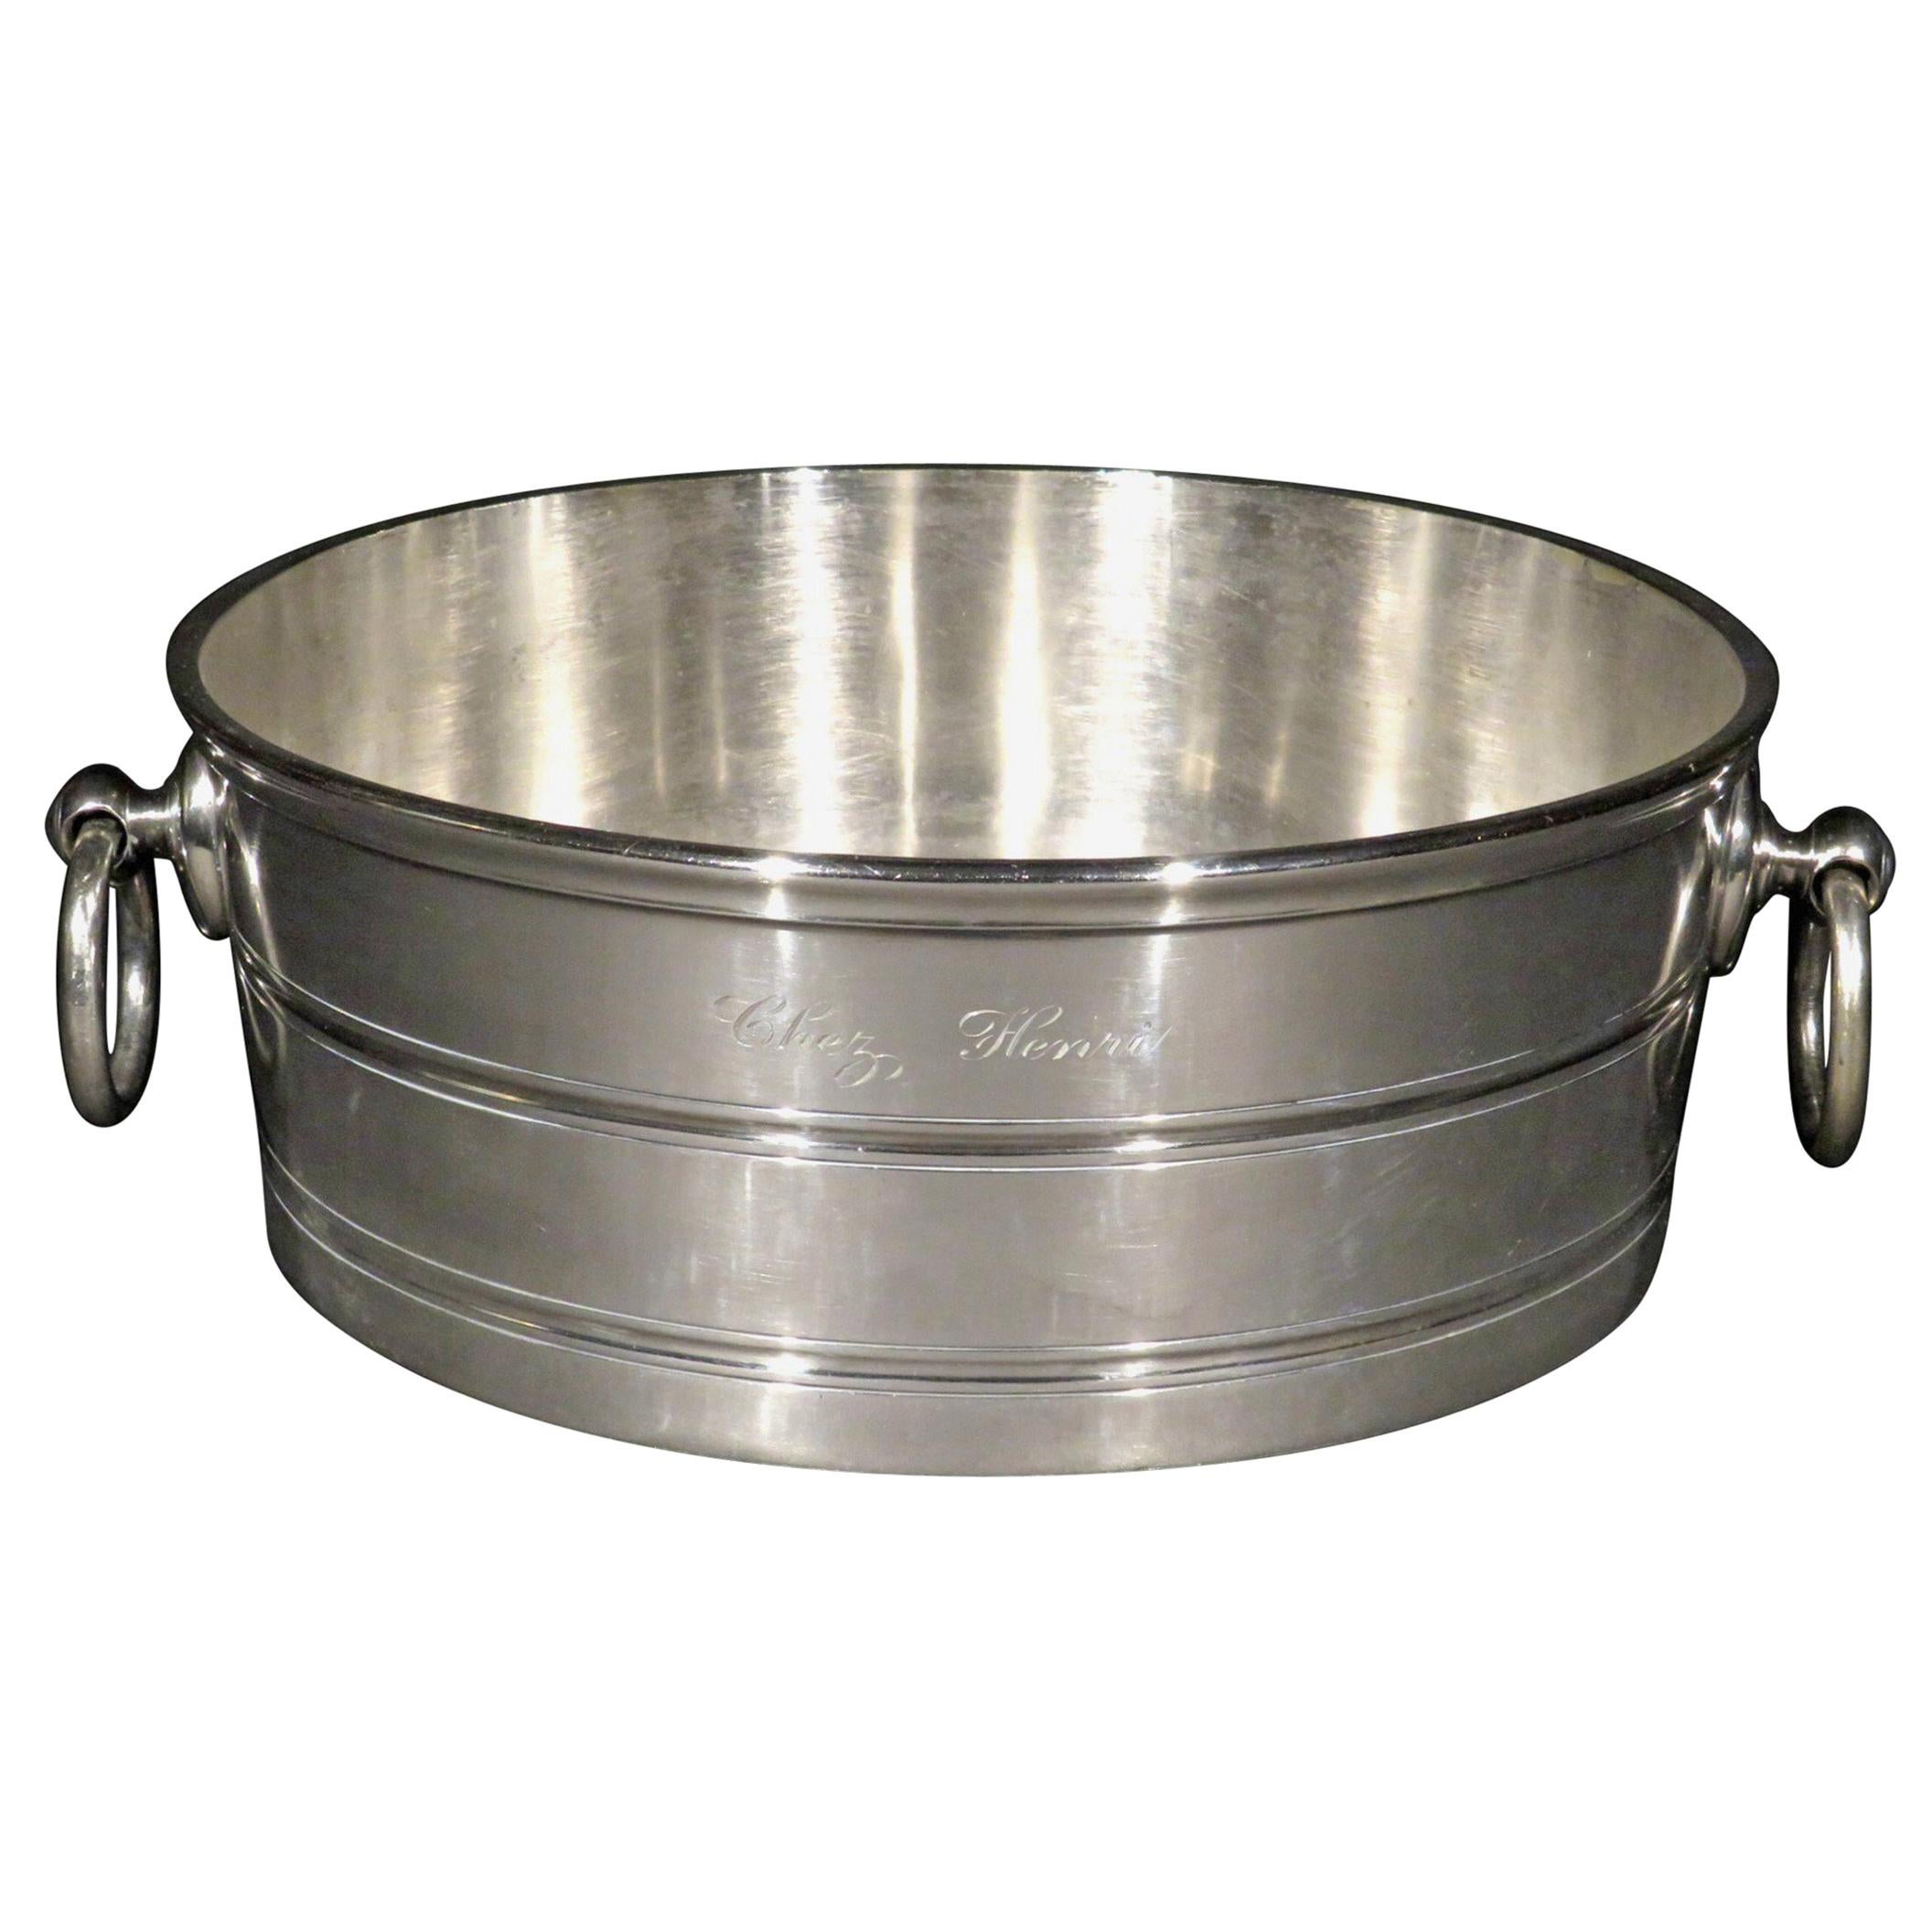 Very Good Early 20th Century Silver Plated Oyster Bucket, U.K, Circa 1930